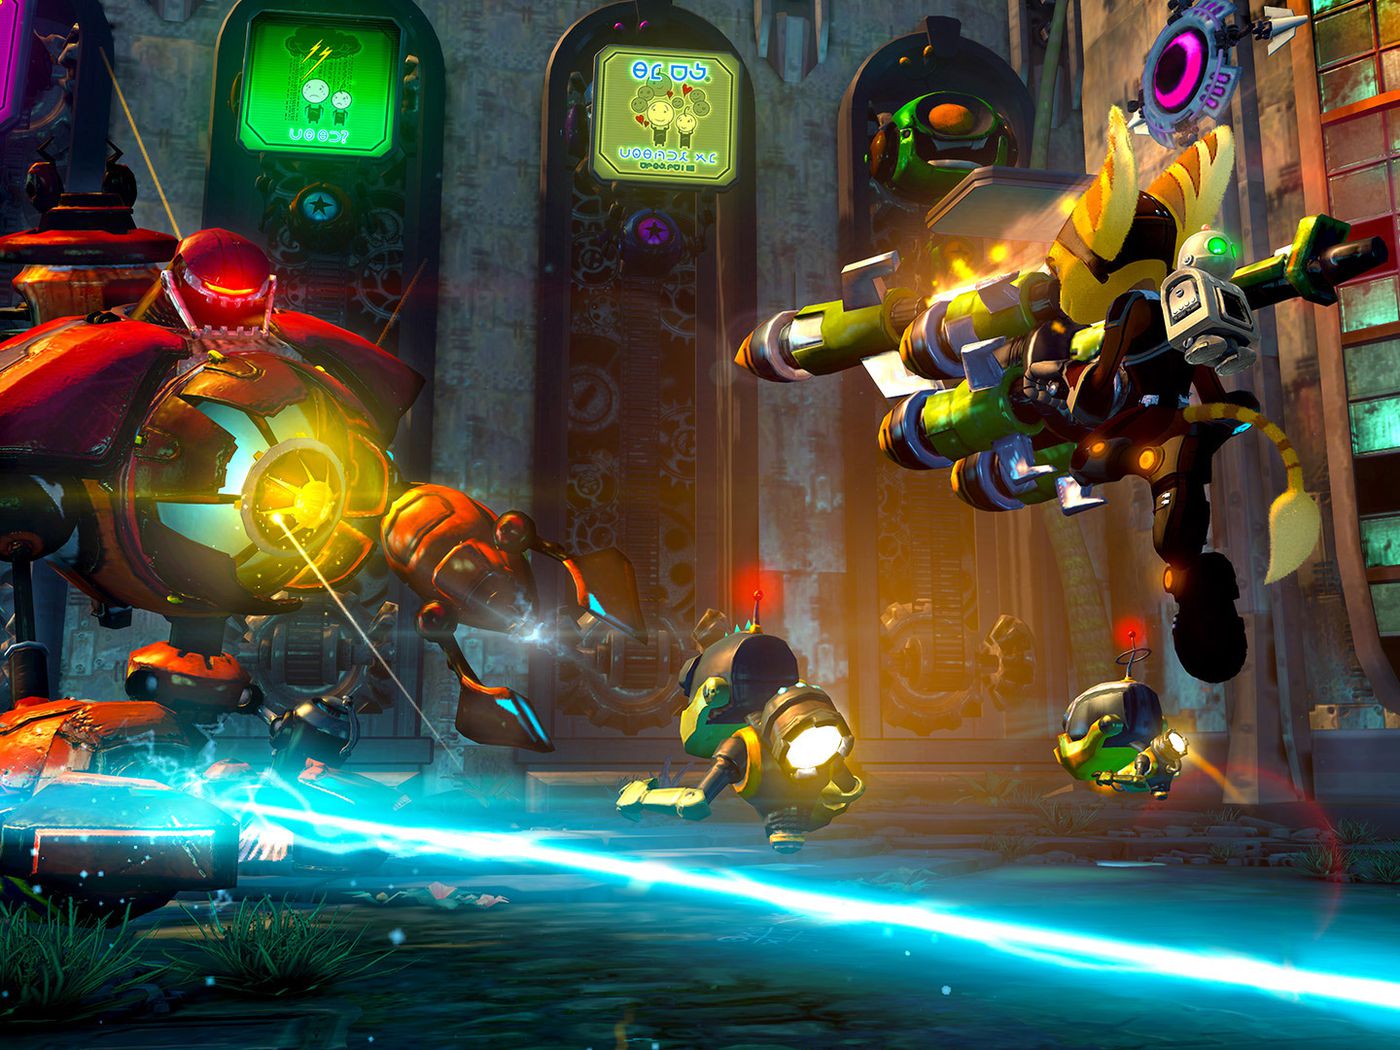 Ratchet & Clank bid PS3 farewell with Into the Nexus, a game with more  gravity - Polygon